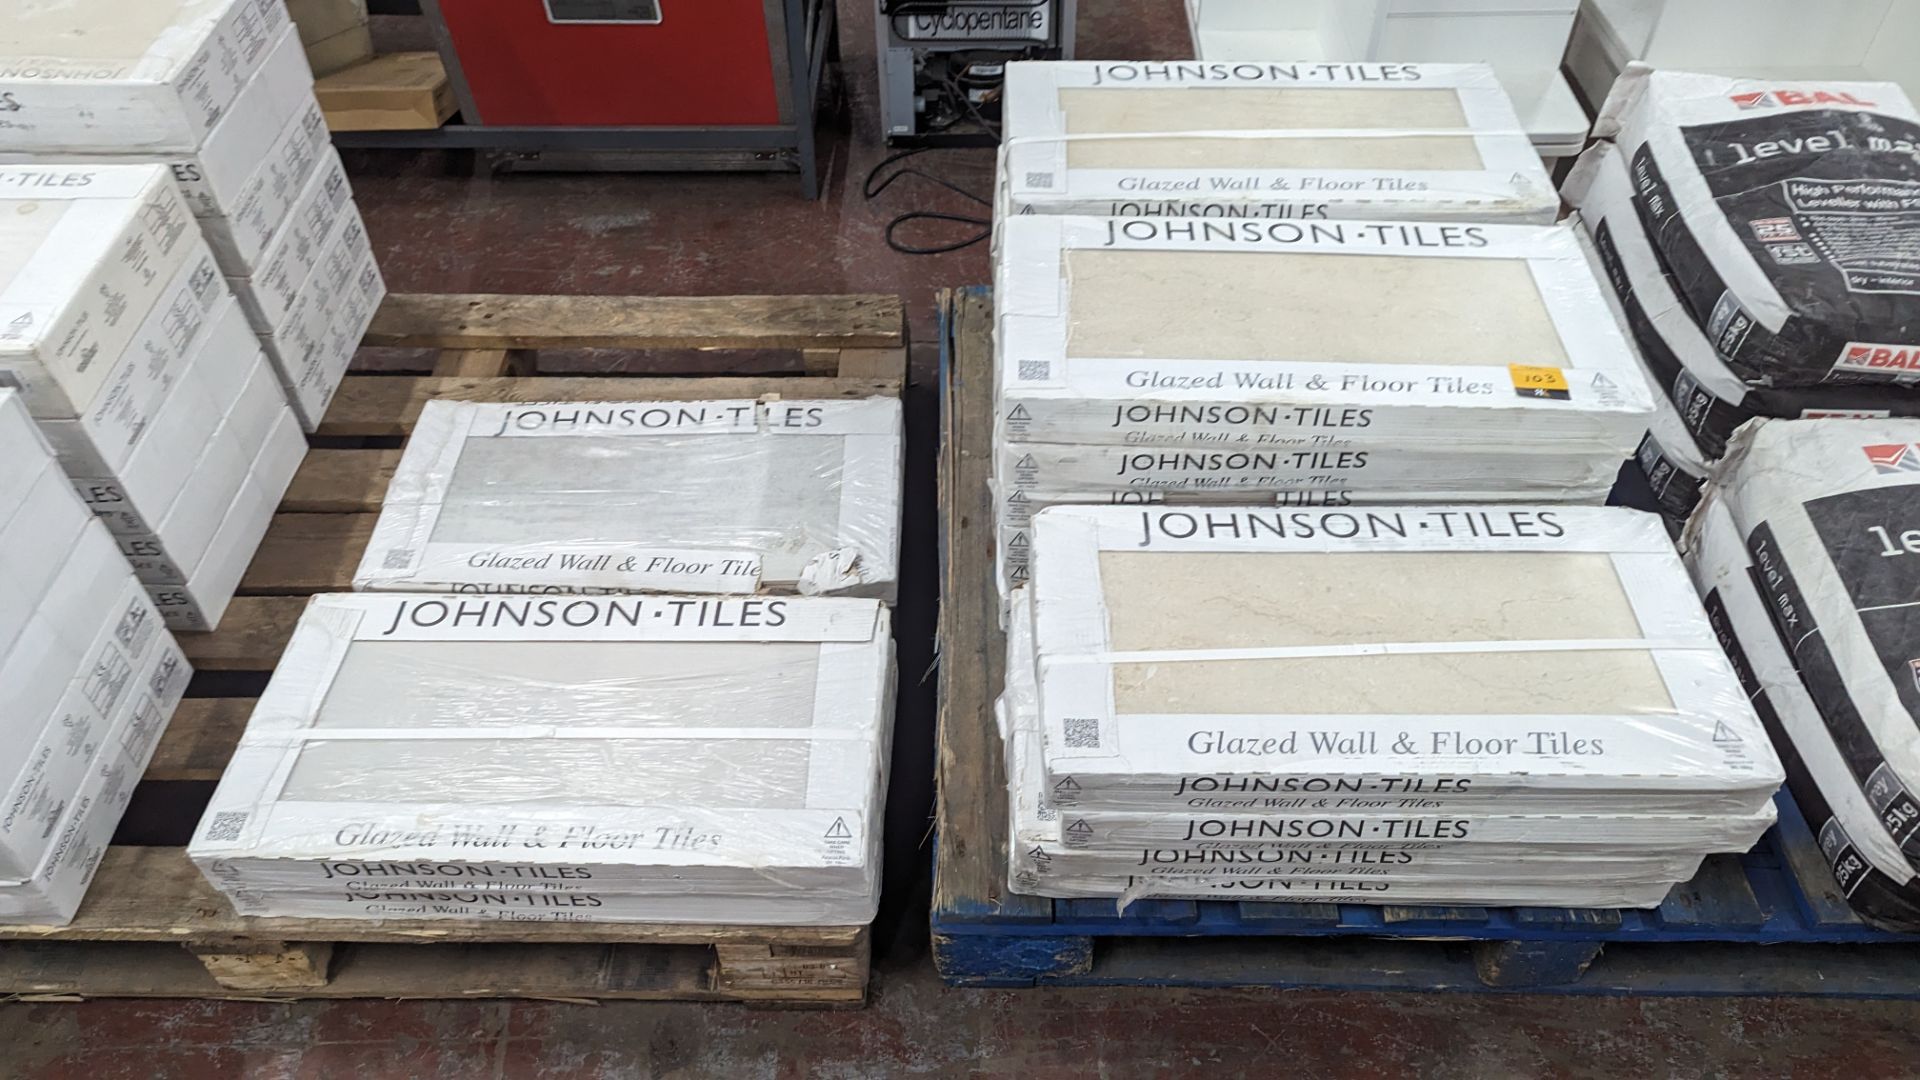 16 packs of Johnson glazed wall and floor tiles each pack contains 5 tiles. Each tile measures 597m